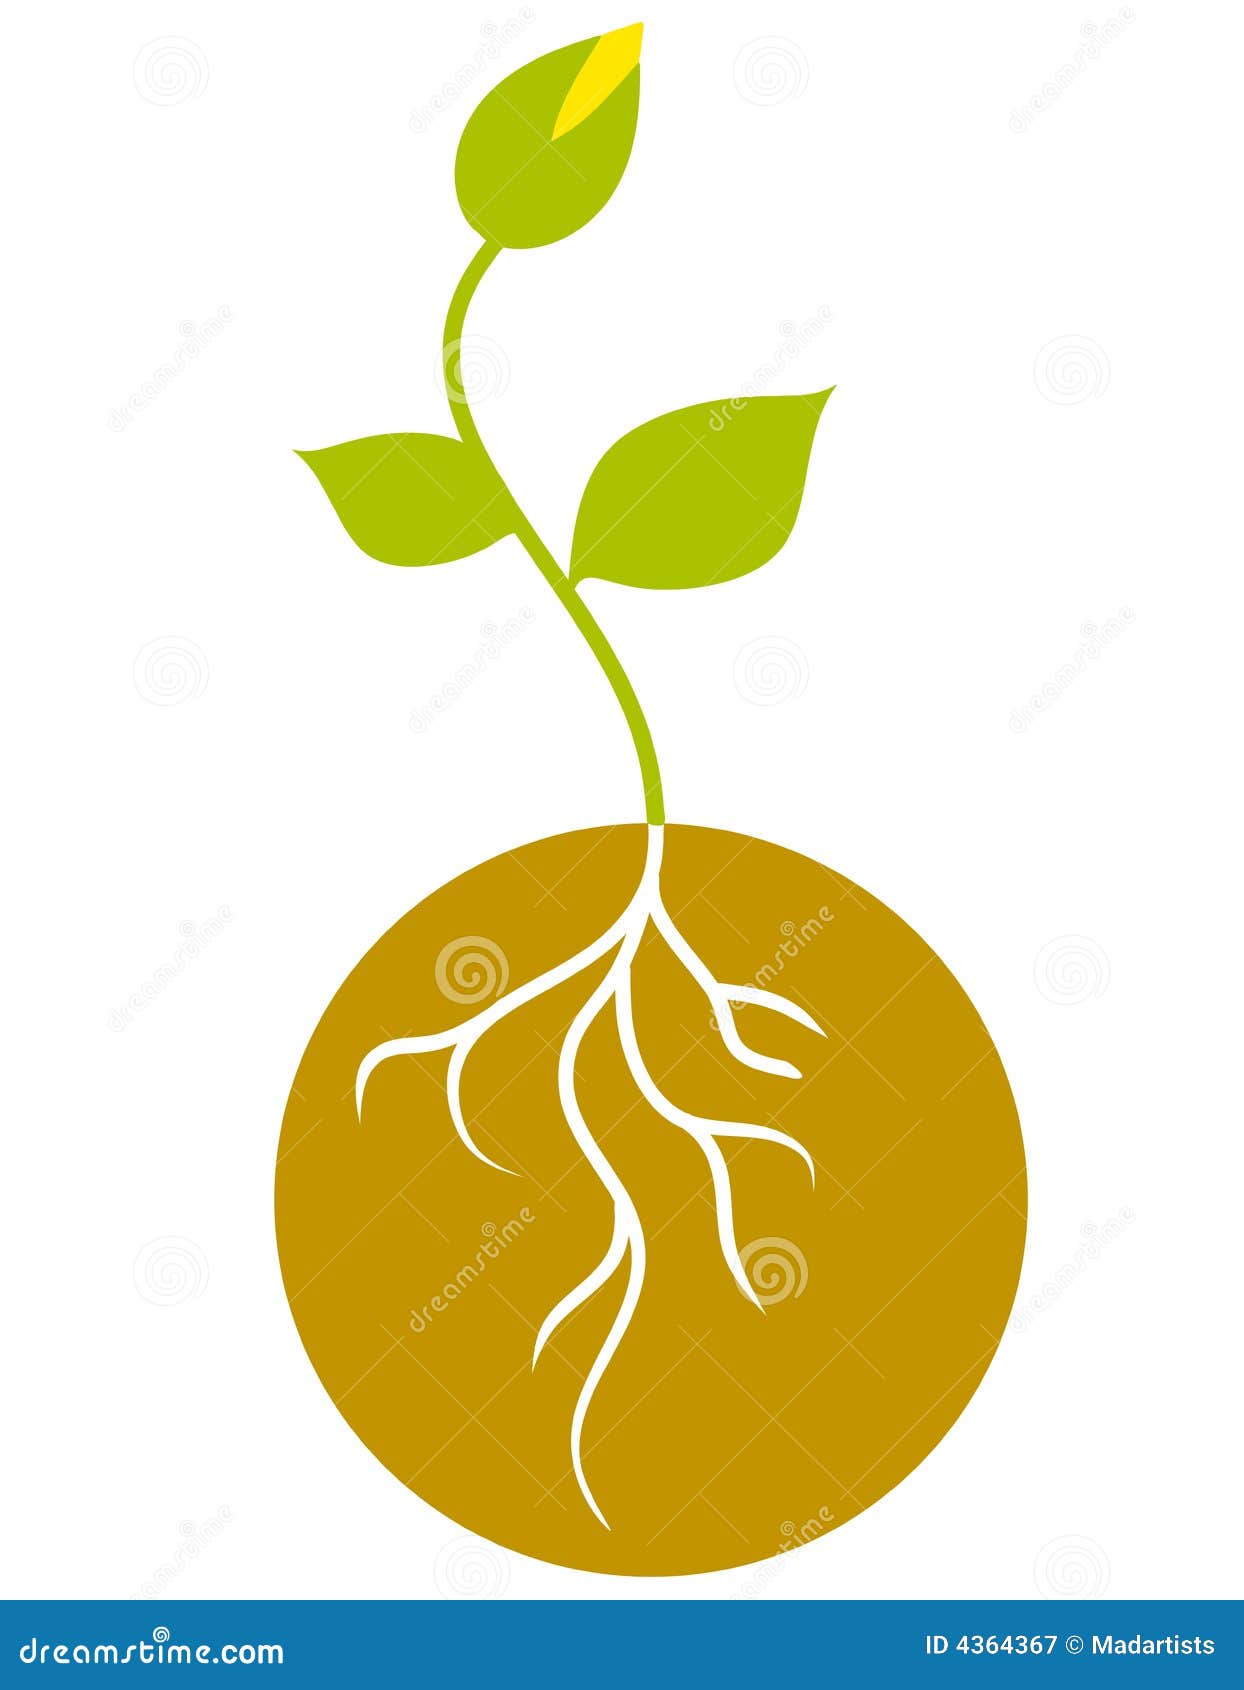 root vegetables clipart - photo #50